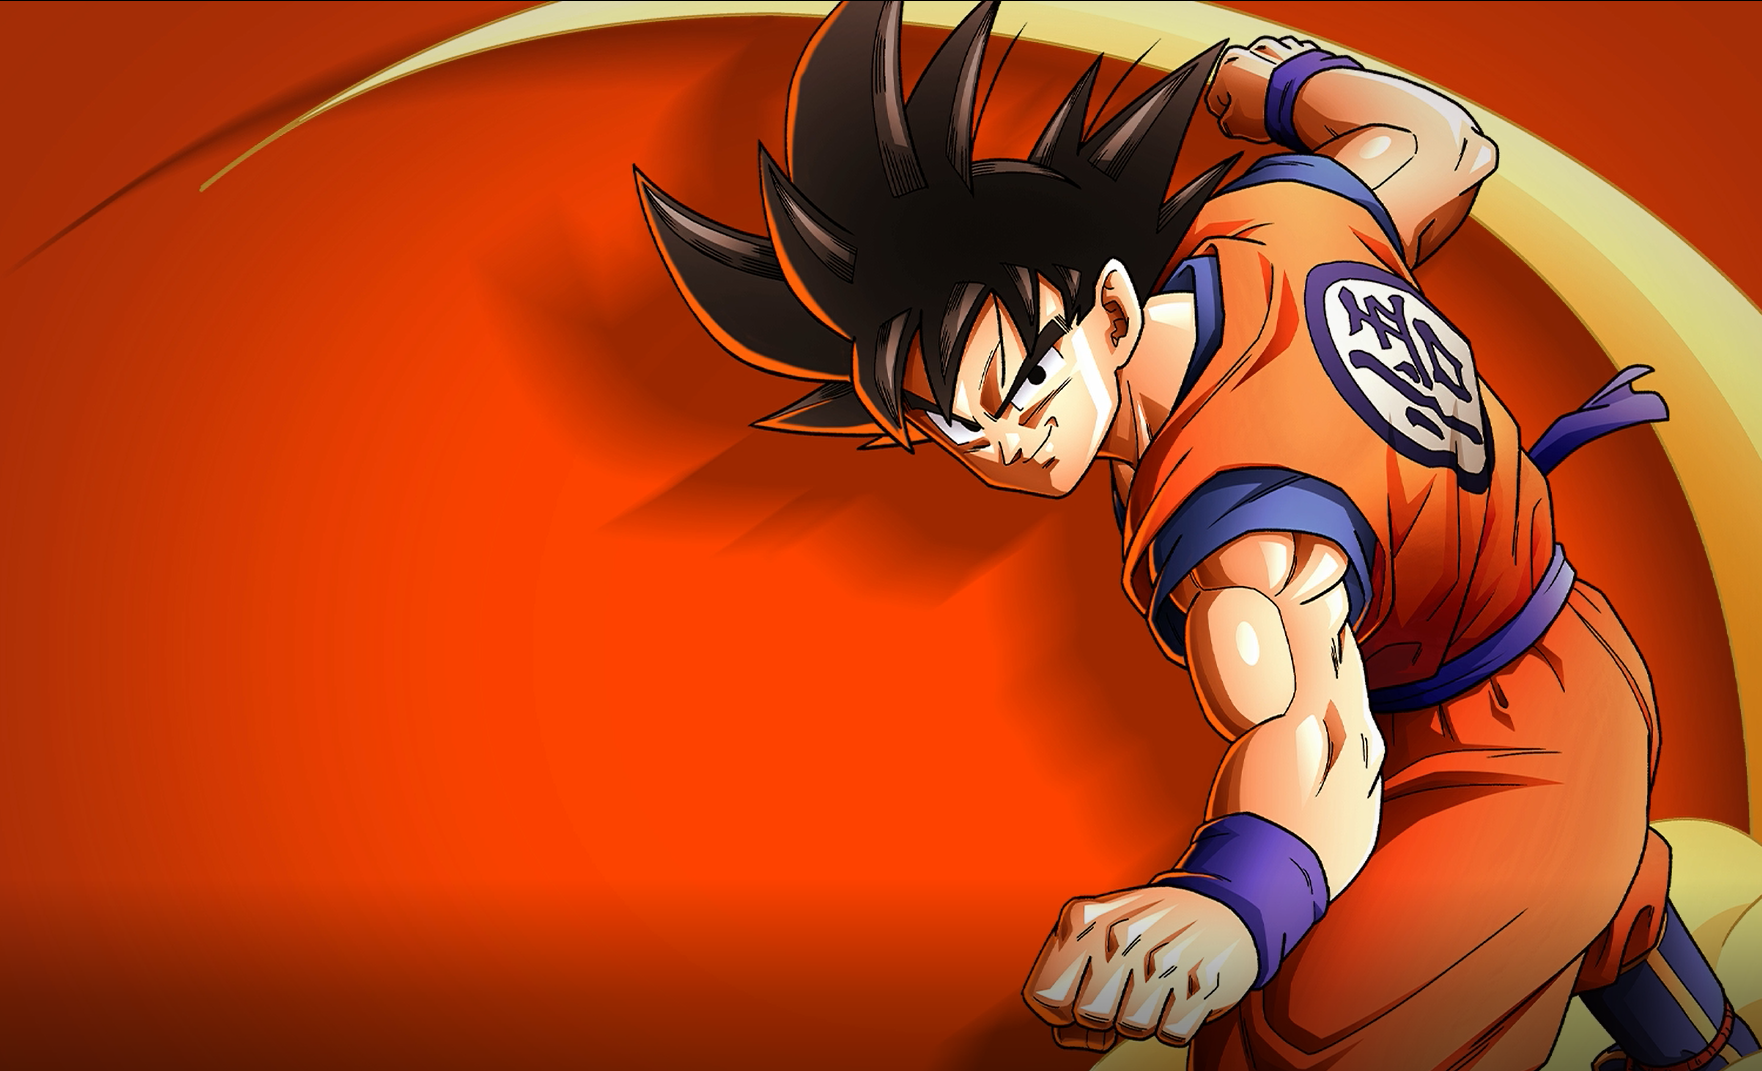 Dragon Ball Super: Super Hero review – eye-candy anime is